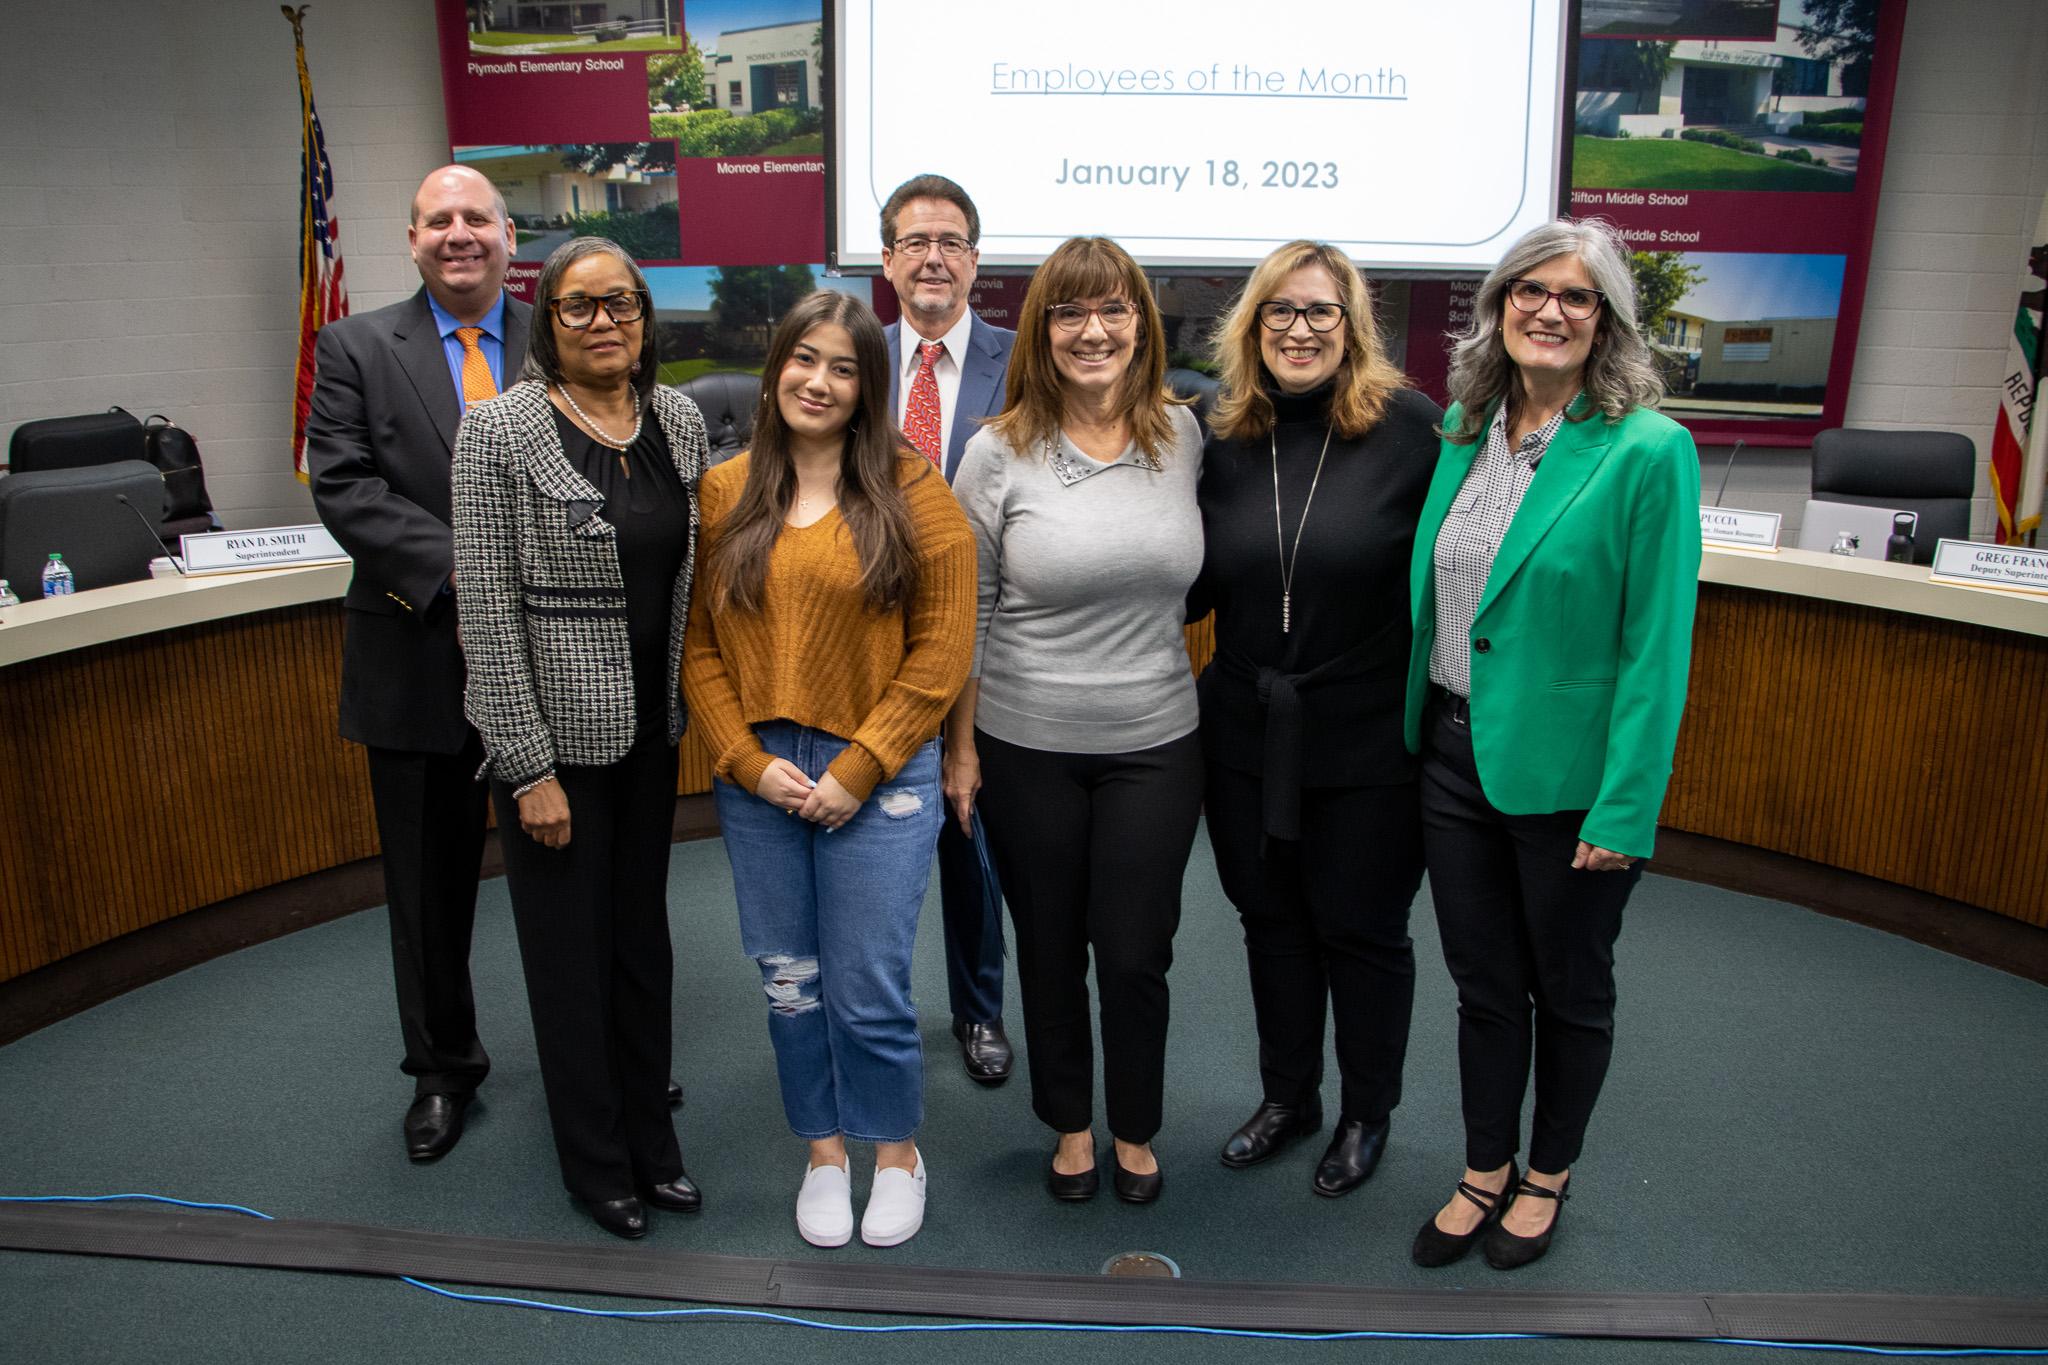 The Board of Education & the Monrovia Chamber of Commerce congratulated Monica DeGuzman on being recipients of Monrovia Unified School District's "Employee of the Month" for January.